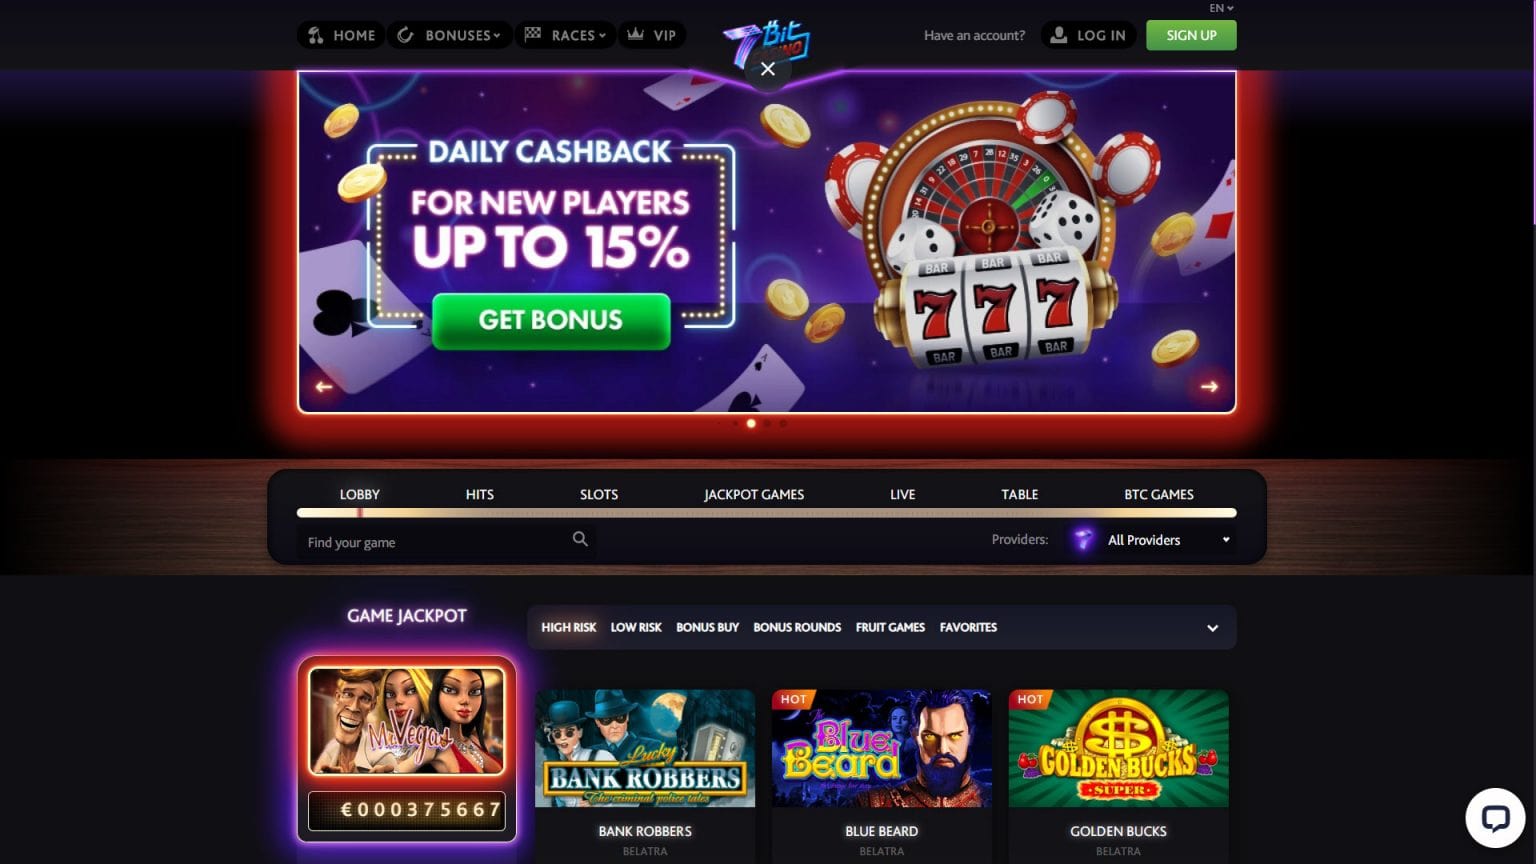 Gaming at Curacao 7 Bit Casino - Is it Worth it?